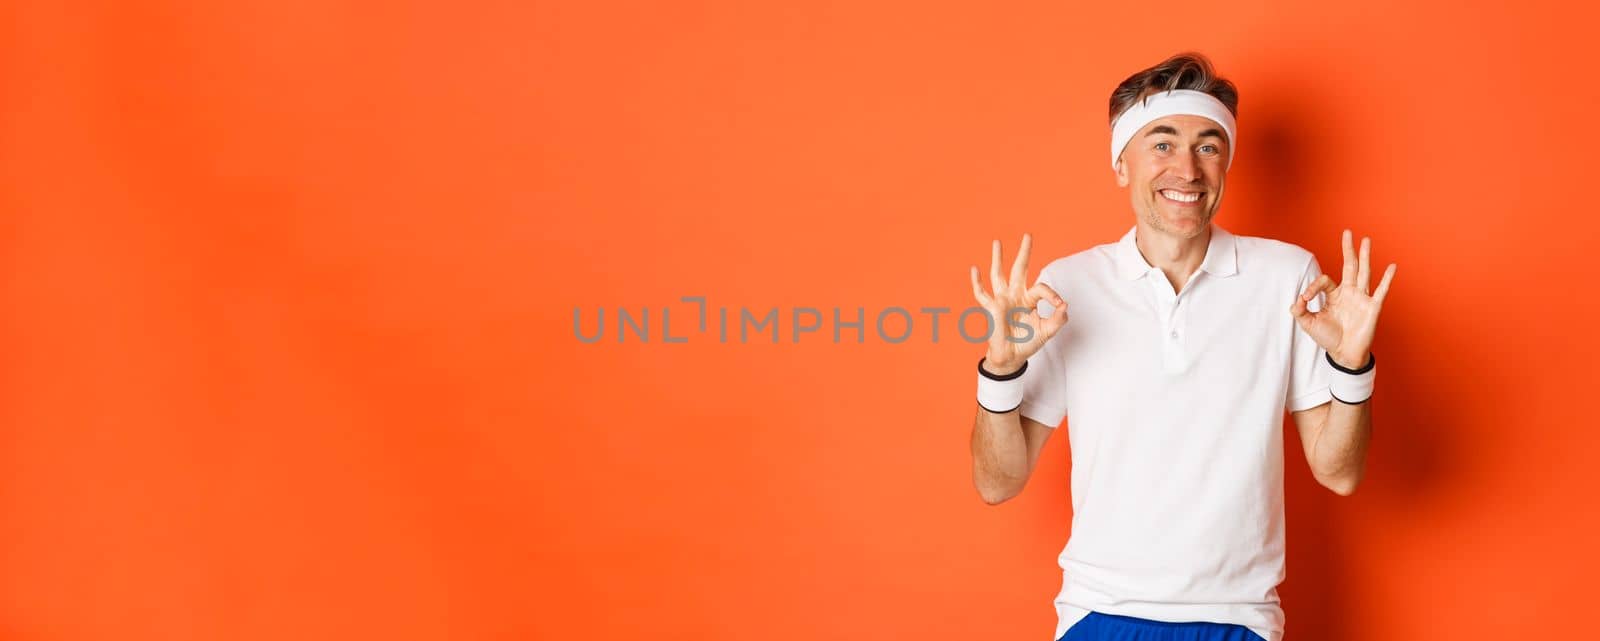 Concept of sport, fitness and lifestyle. Portrait of cheerful middle-aged male athlete, smiling pleased and showing okay signs, approve or recommend something, standing over orange background.